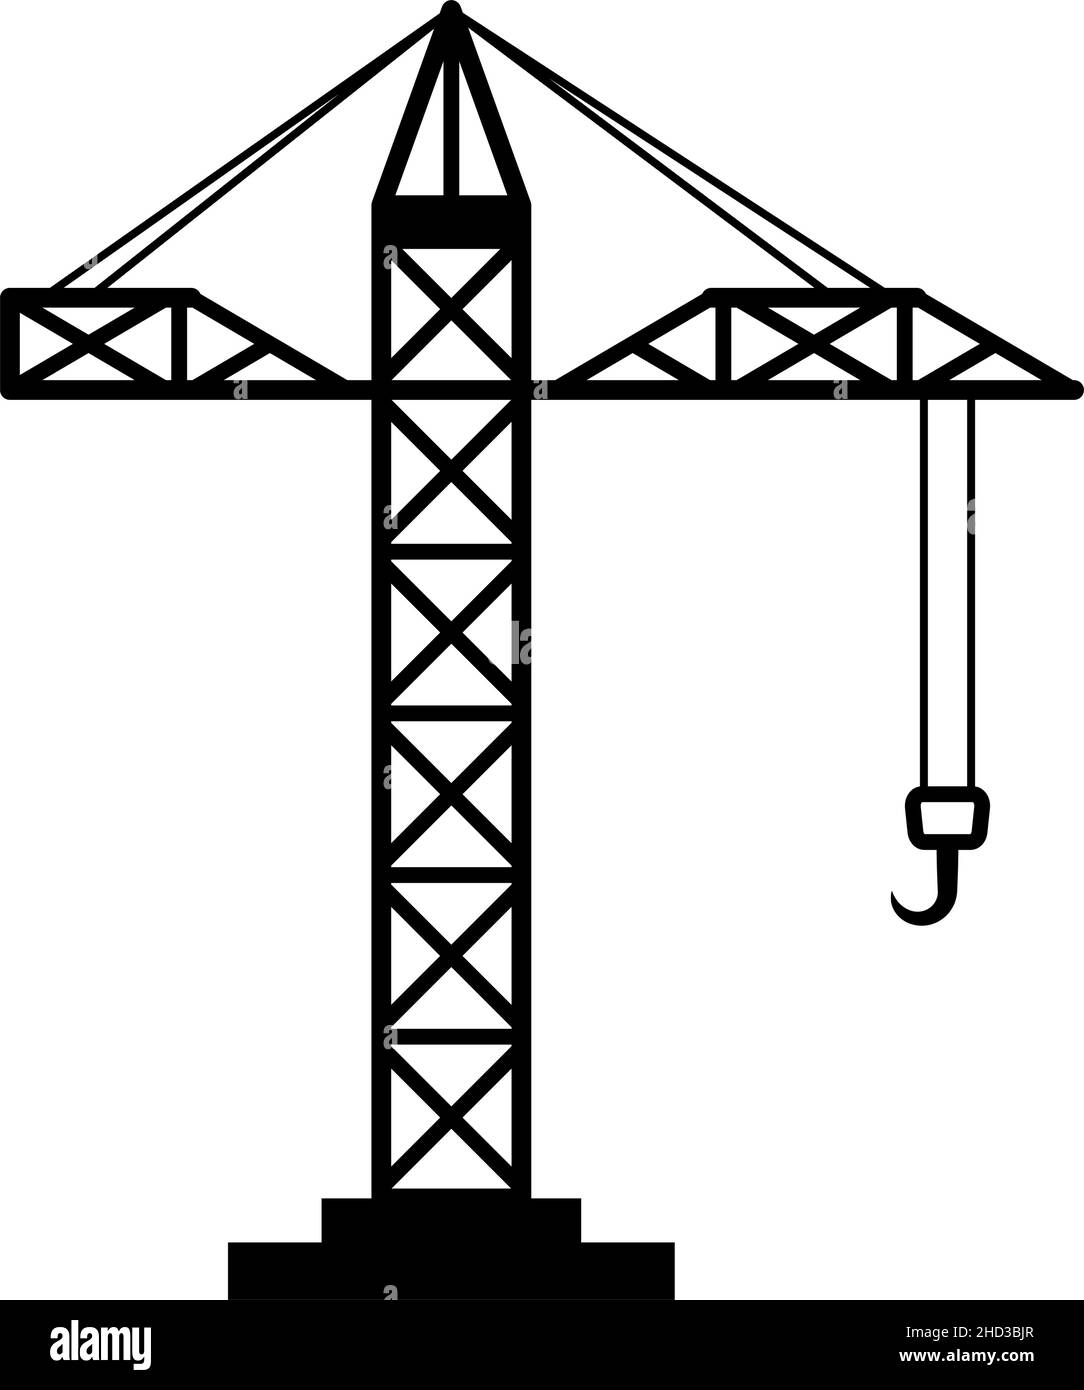 Tower crane isolated flat design Royalty Free Vector Image